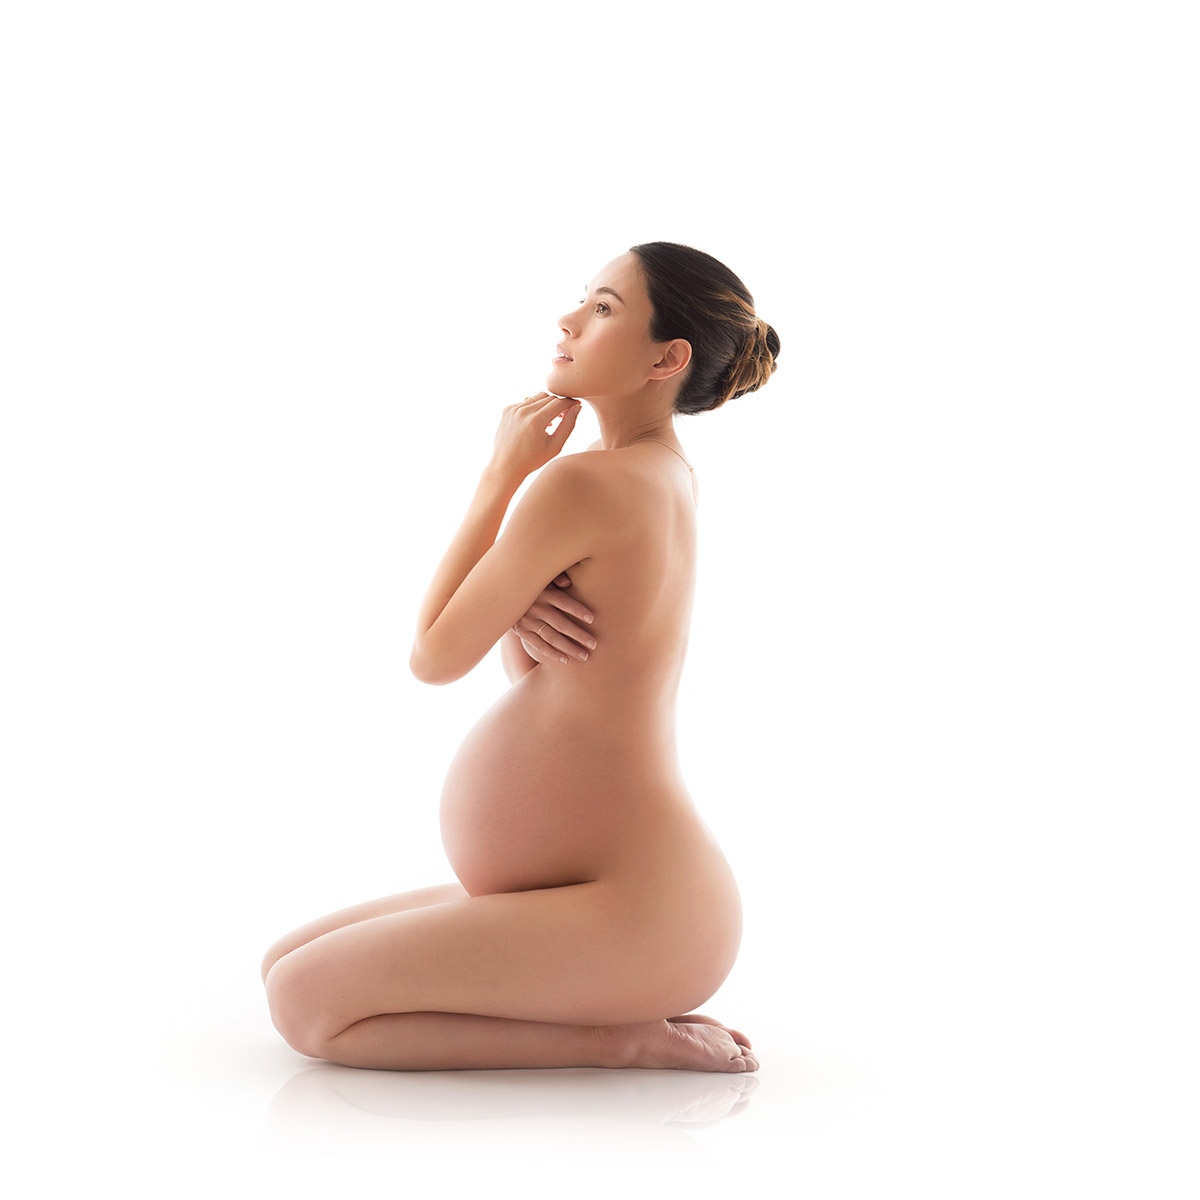 Nude woman sitting on the floor and showing off her pregnant belly